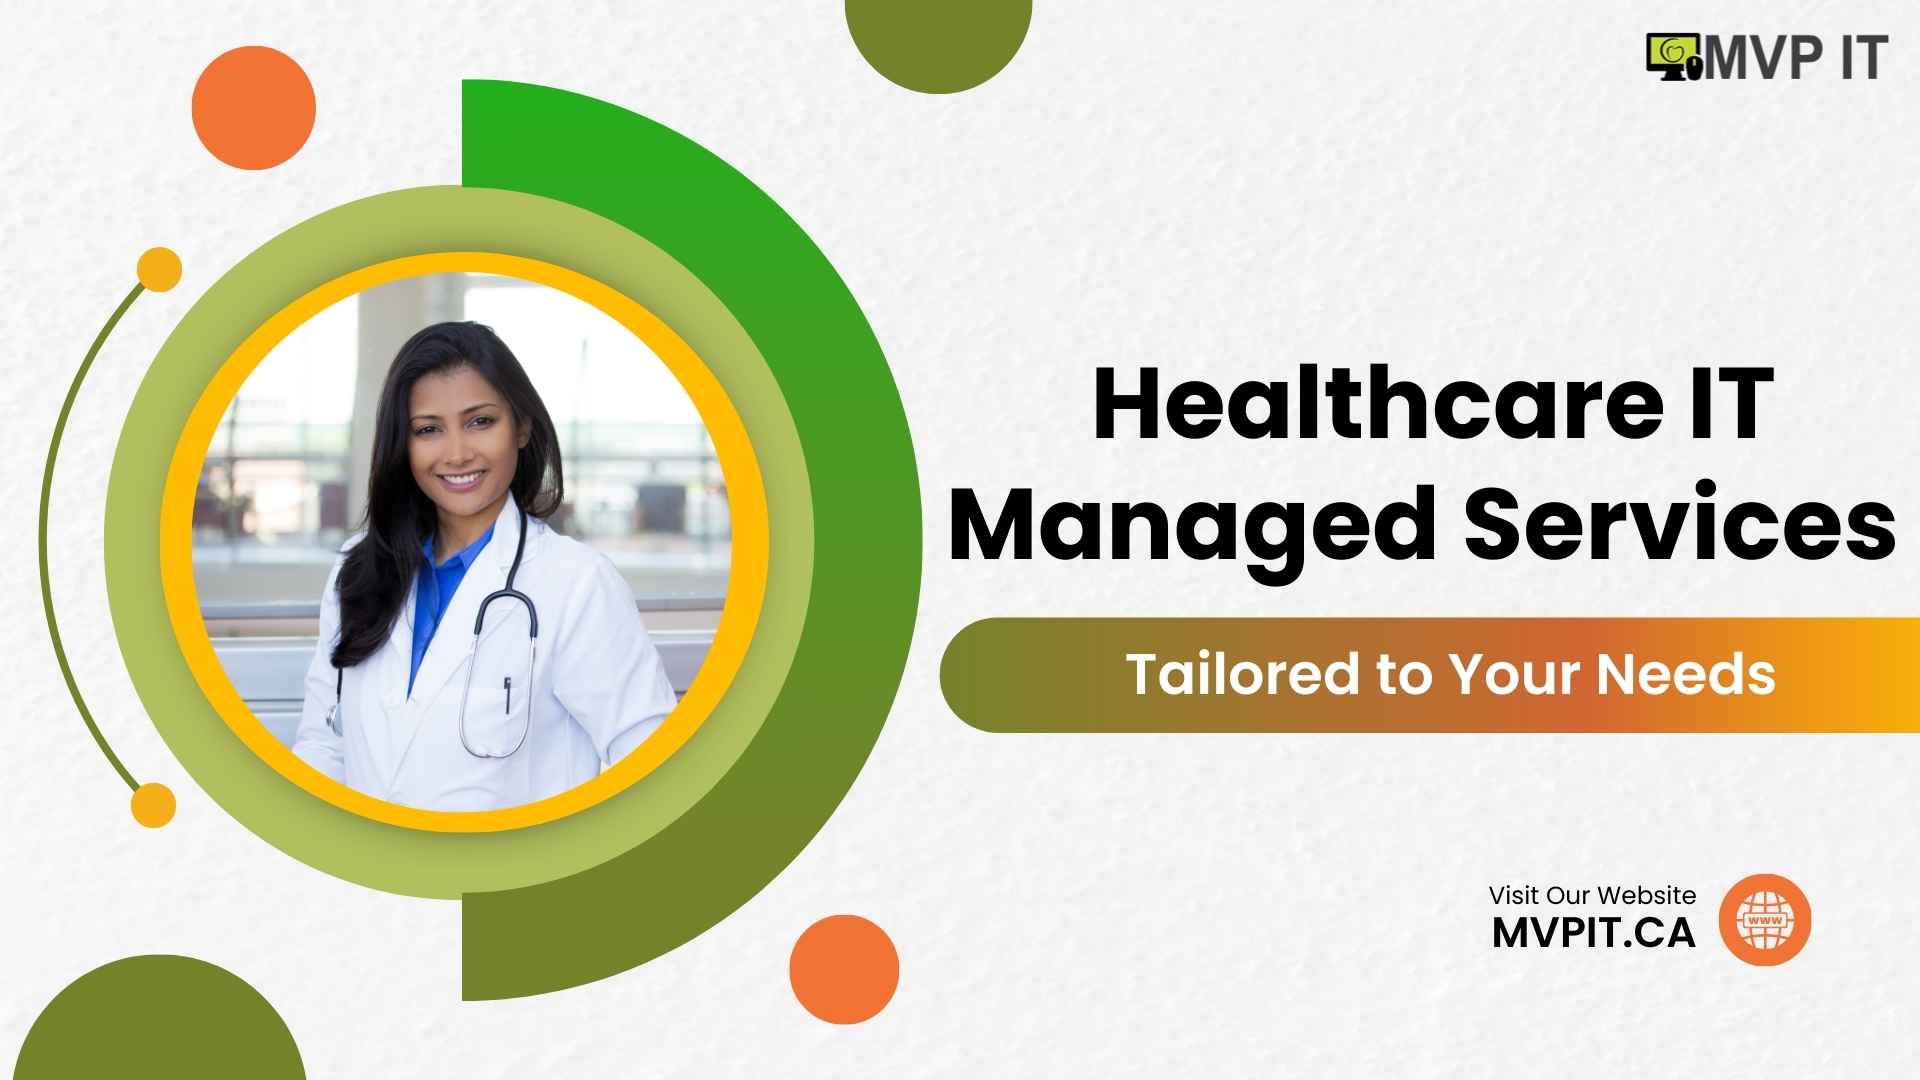 Healthcare IT Managed Services